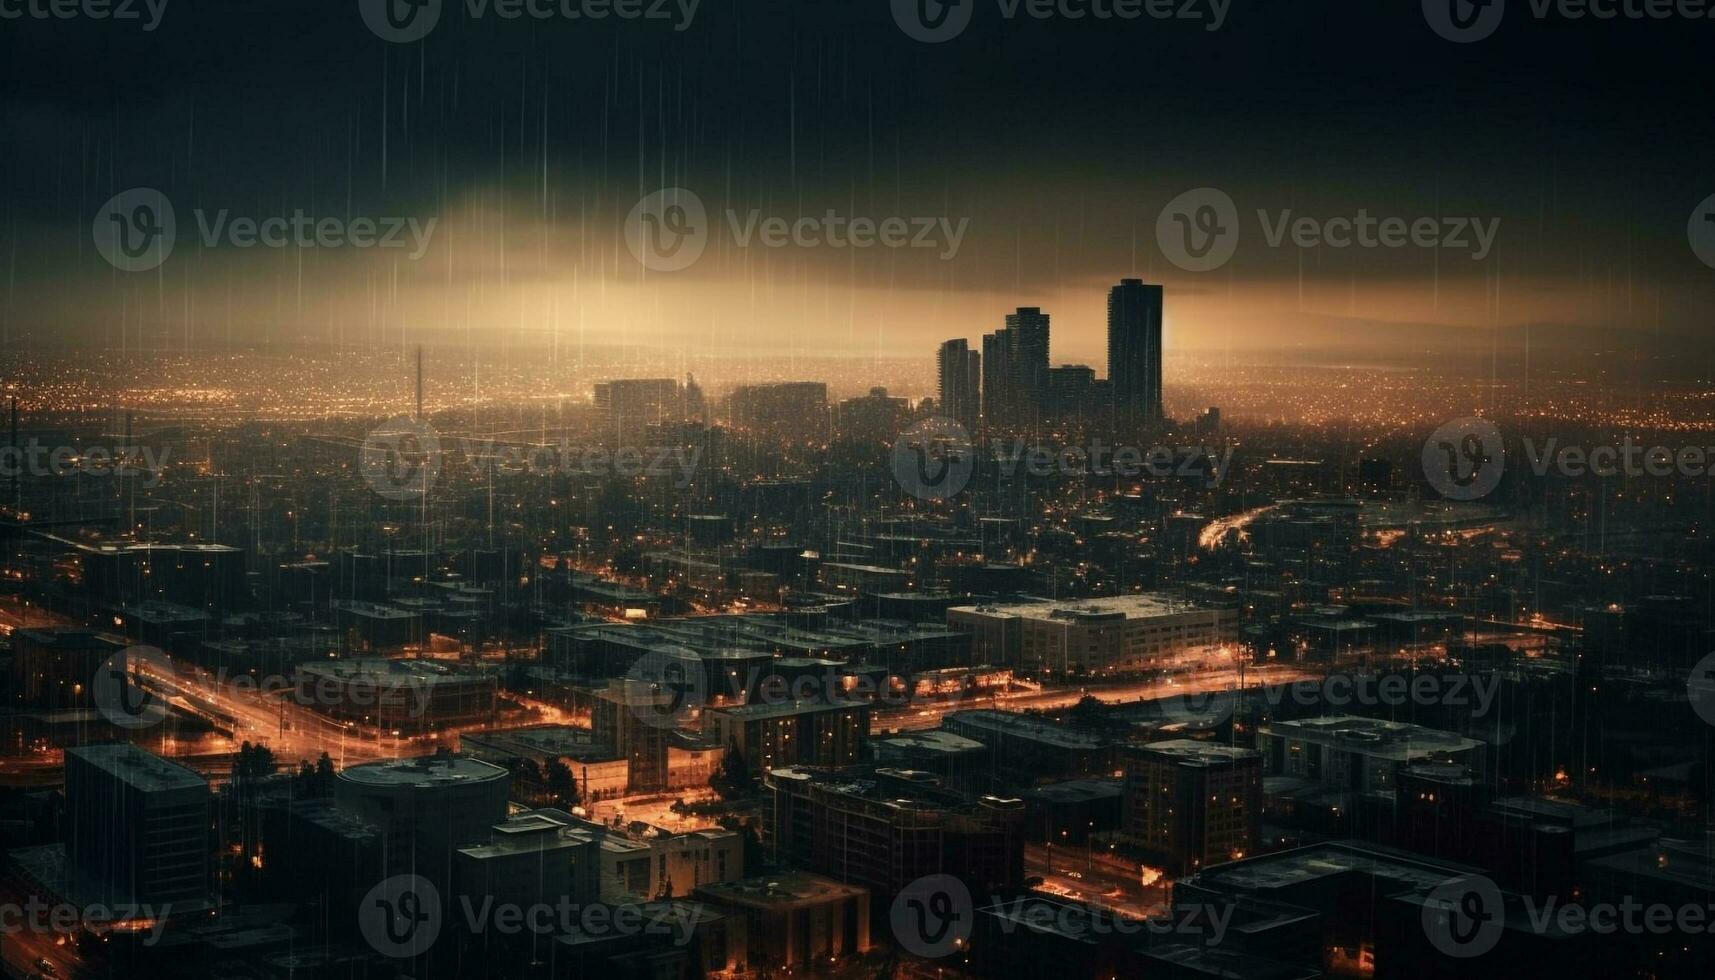 Glowing skyscrapers illuminate the modern city skyline generated by AI photo